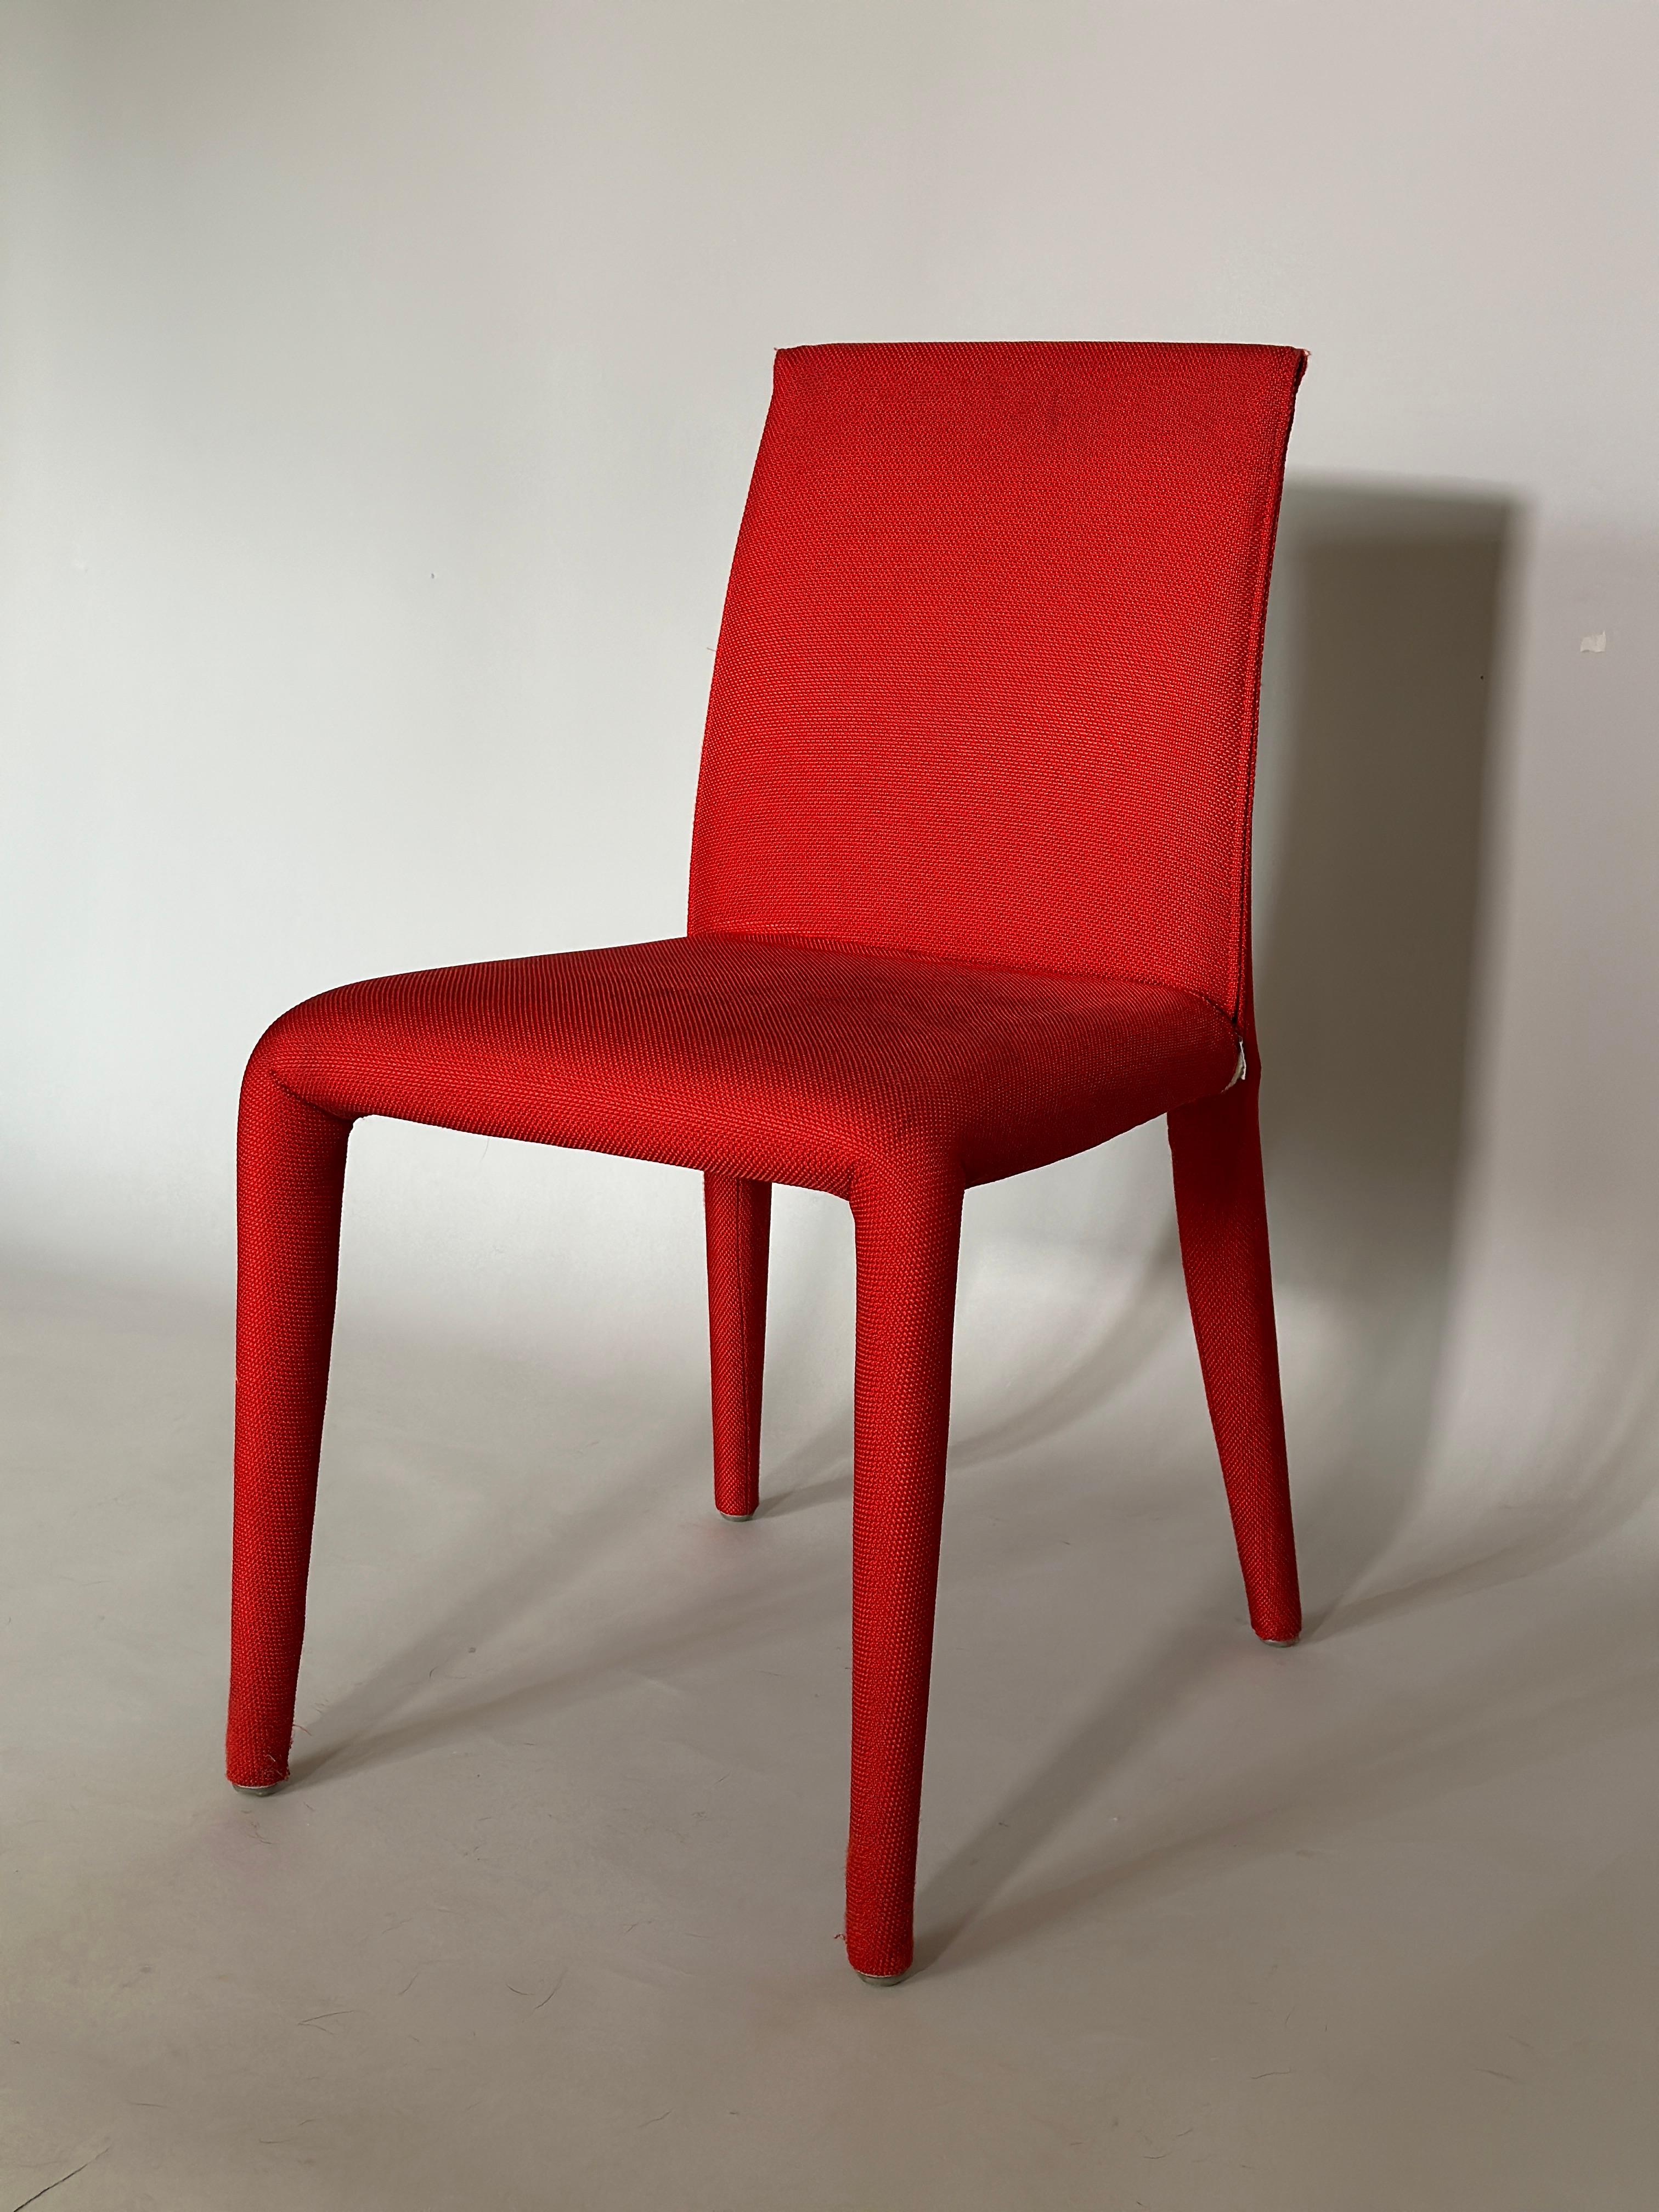 Set of four dining chairs in red fabric by Mario Bellini for B&B Italia. 
Modern design, faboulos red dining chairs.